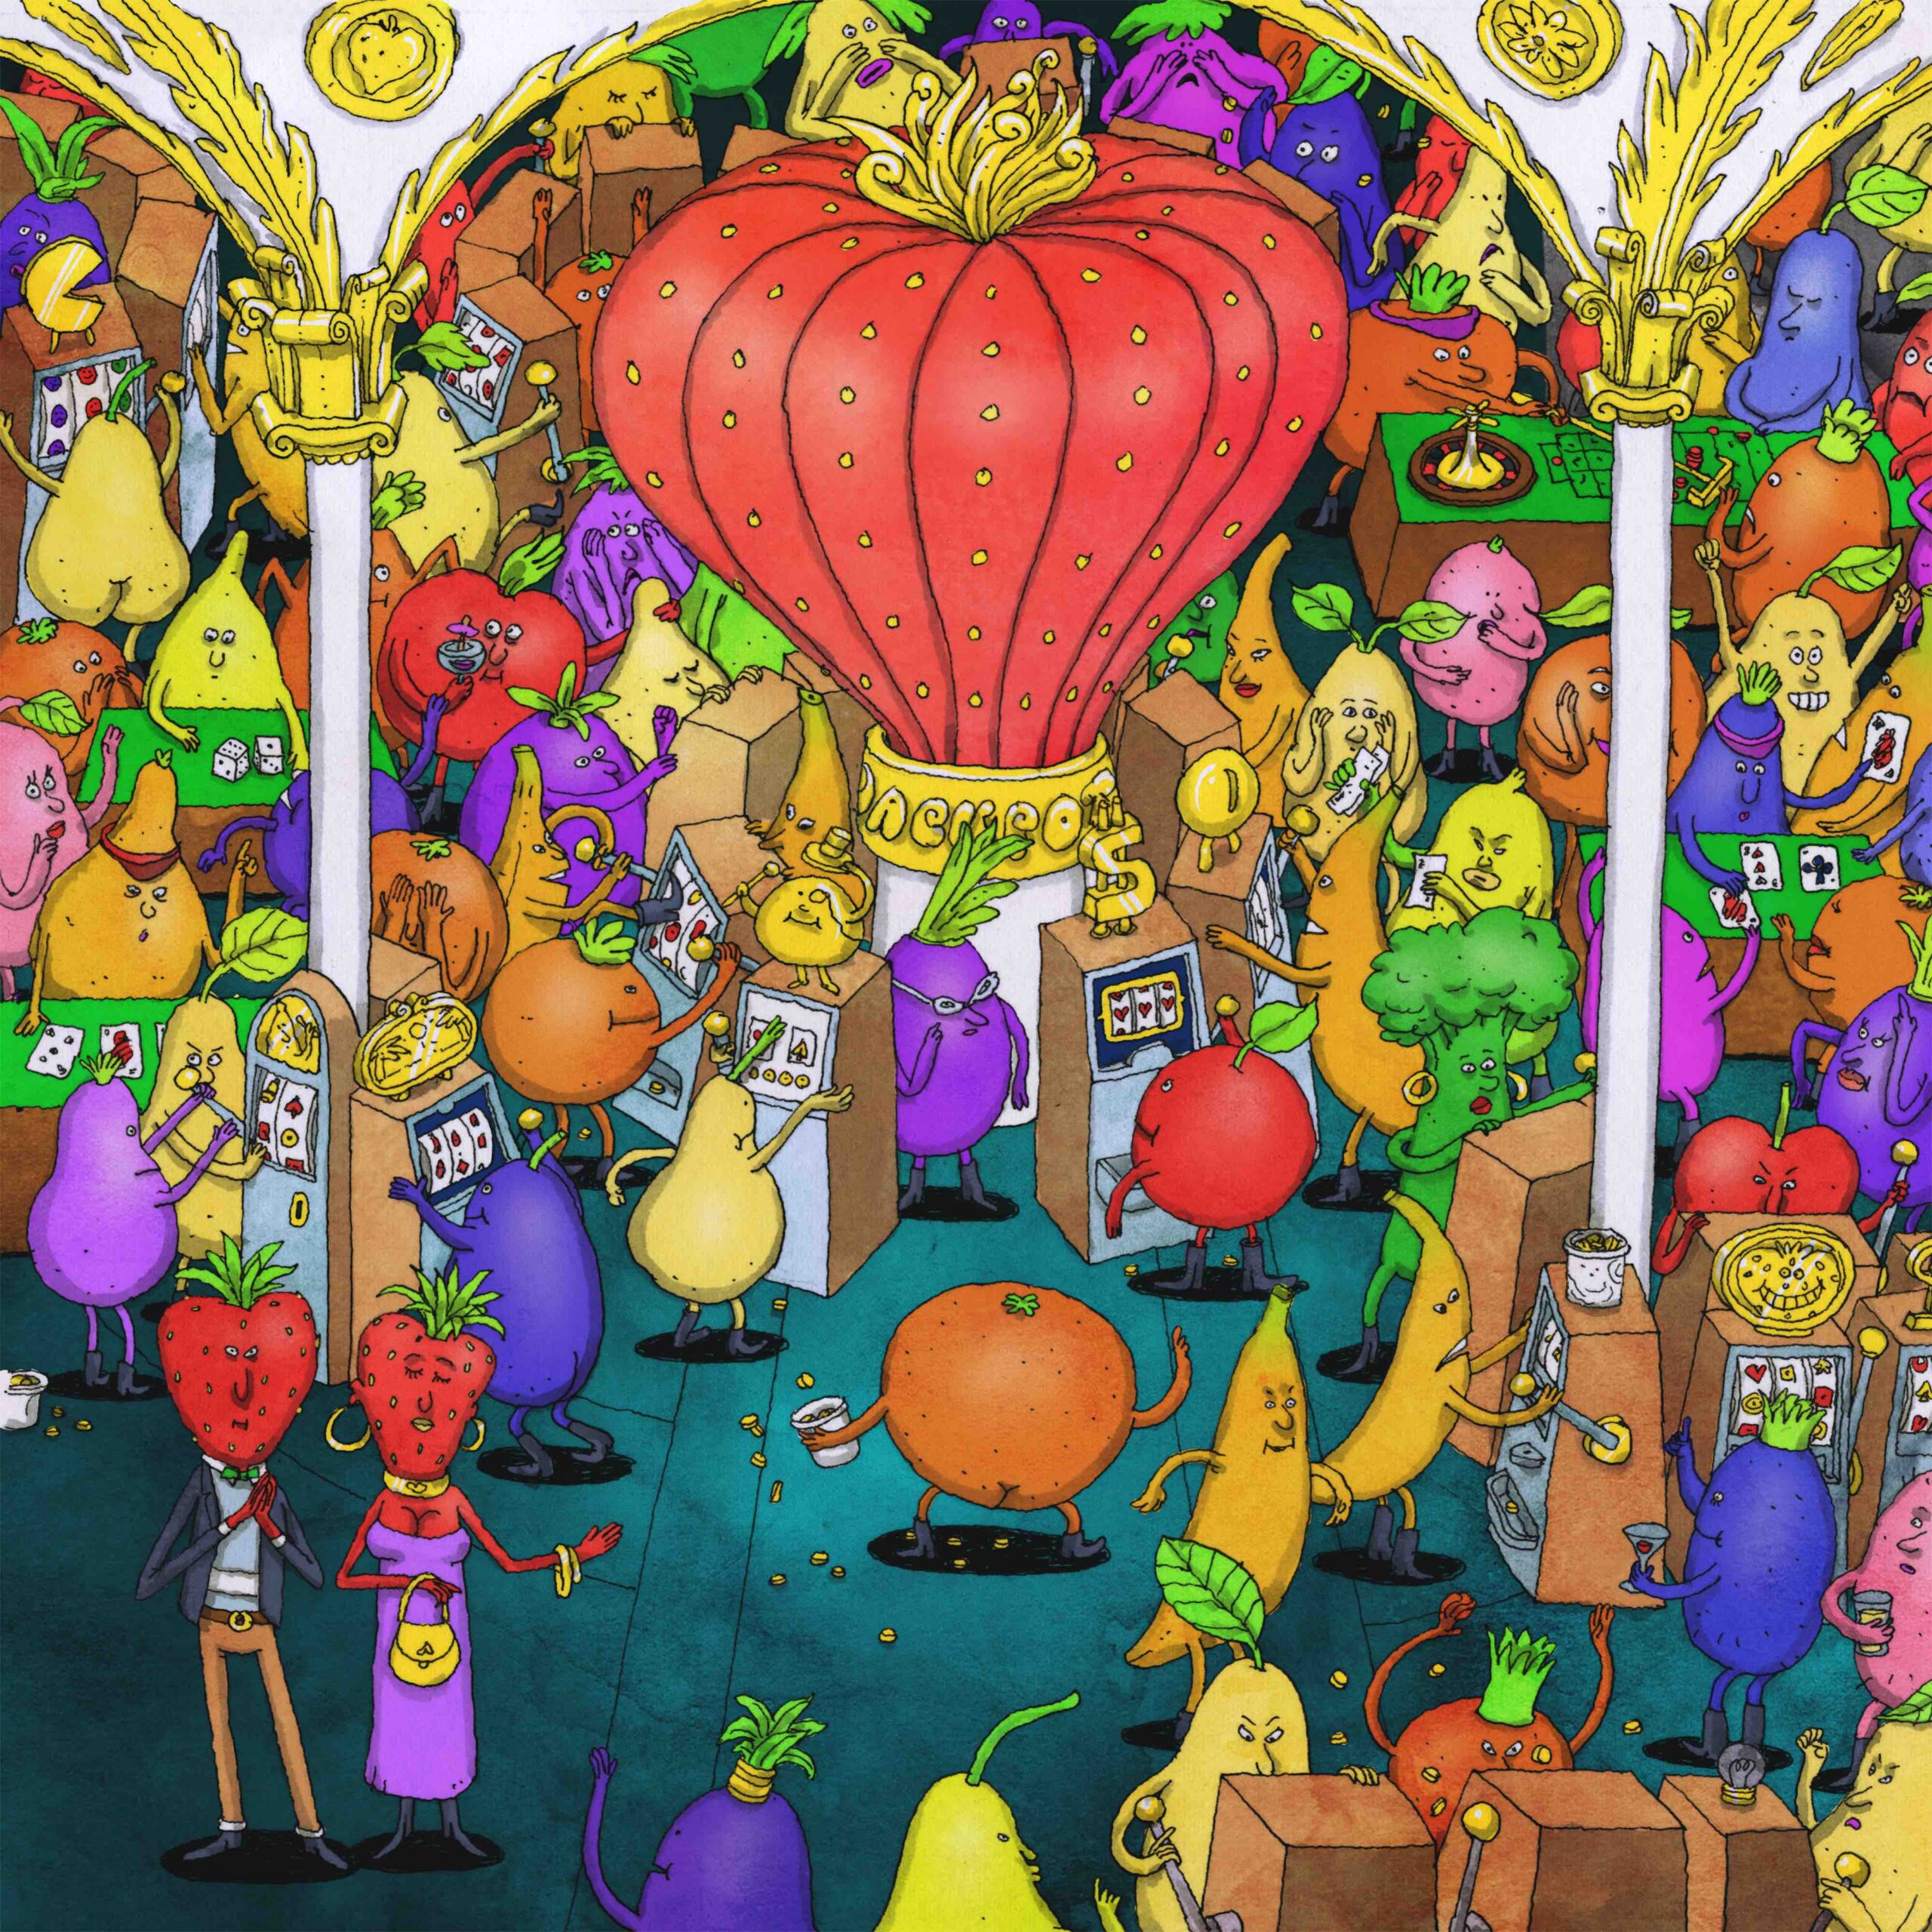 DANCE GAVIN DANCE – DROP BRAND NEW TRACK “DIE ANOTHER DAY”